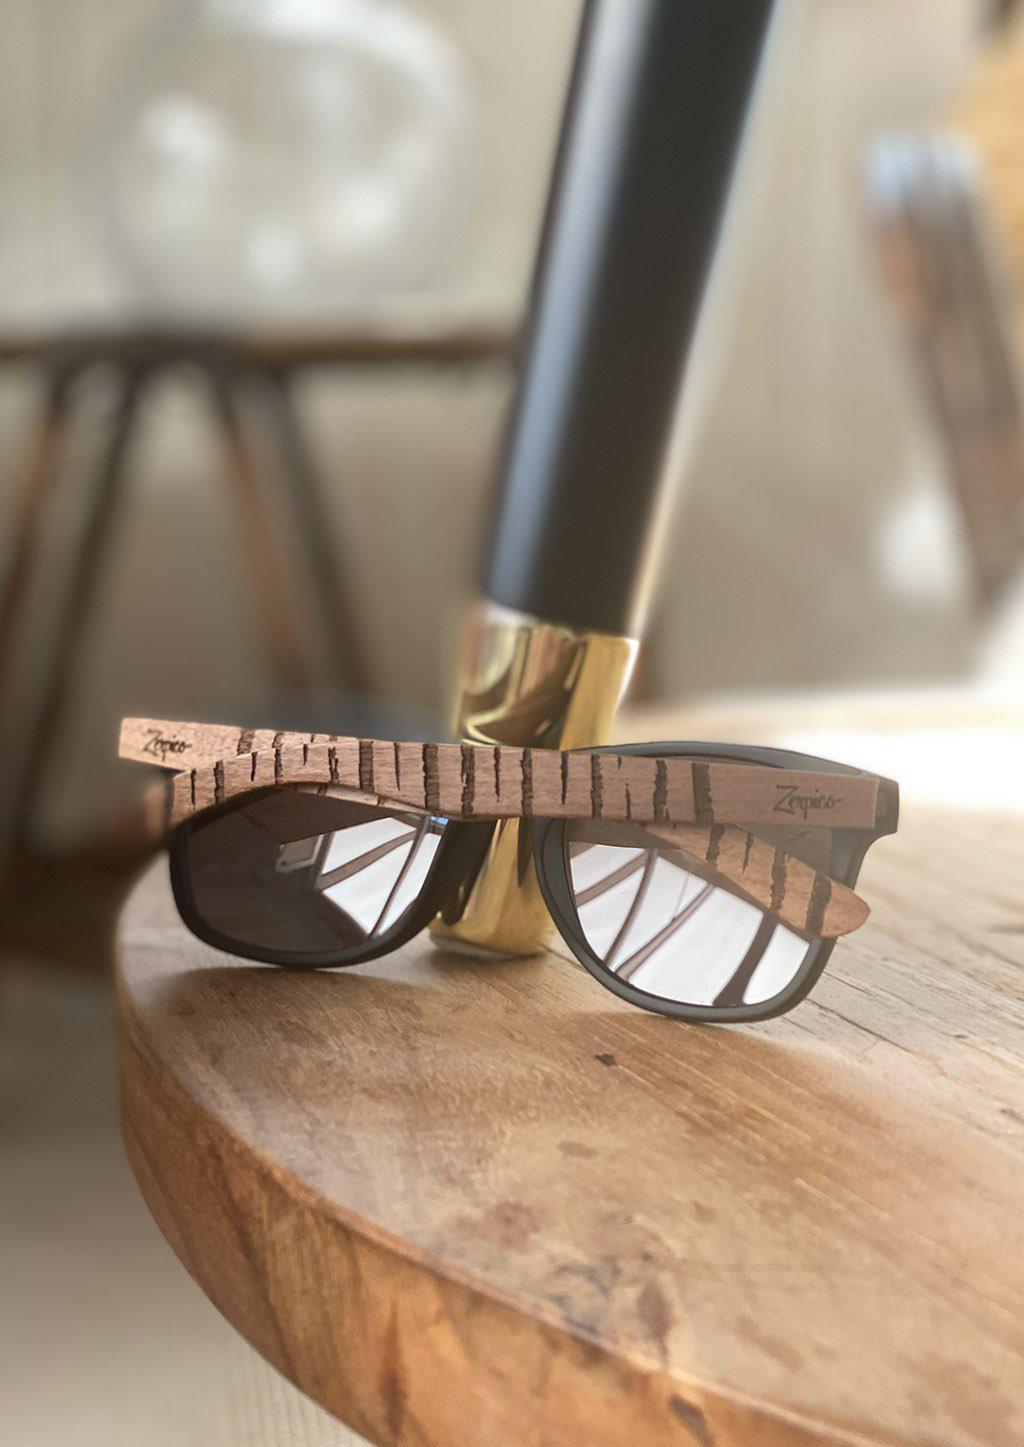 Engraved wooden sunglasses inspired by the untamed tigers and lions. Lifestyle photo taken inside.